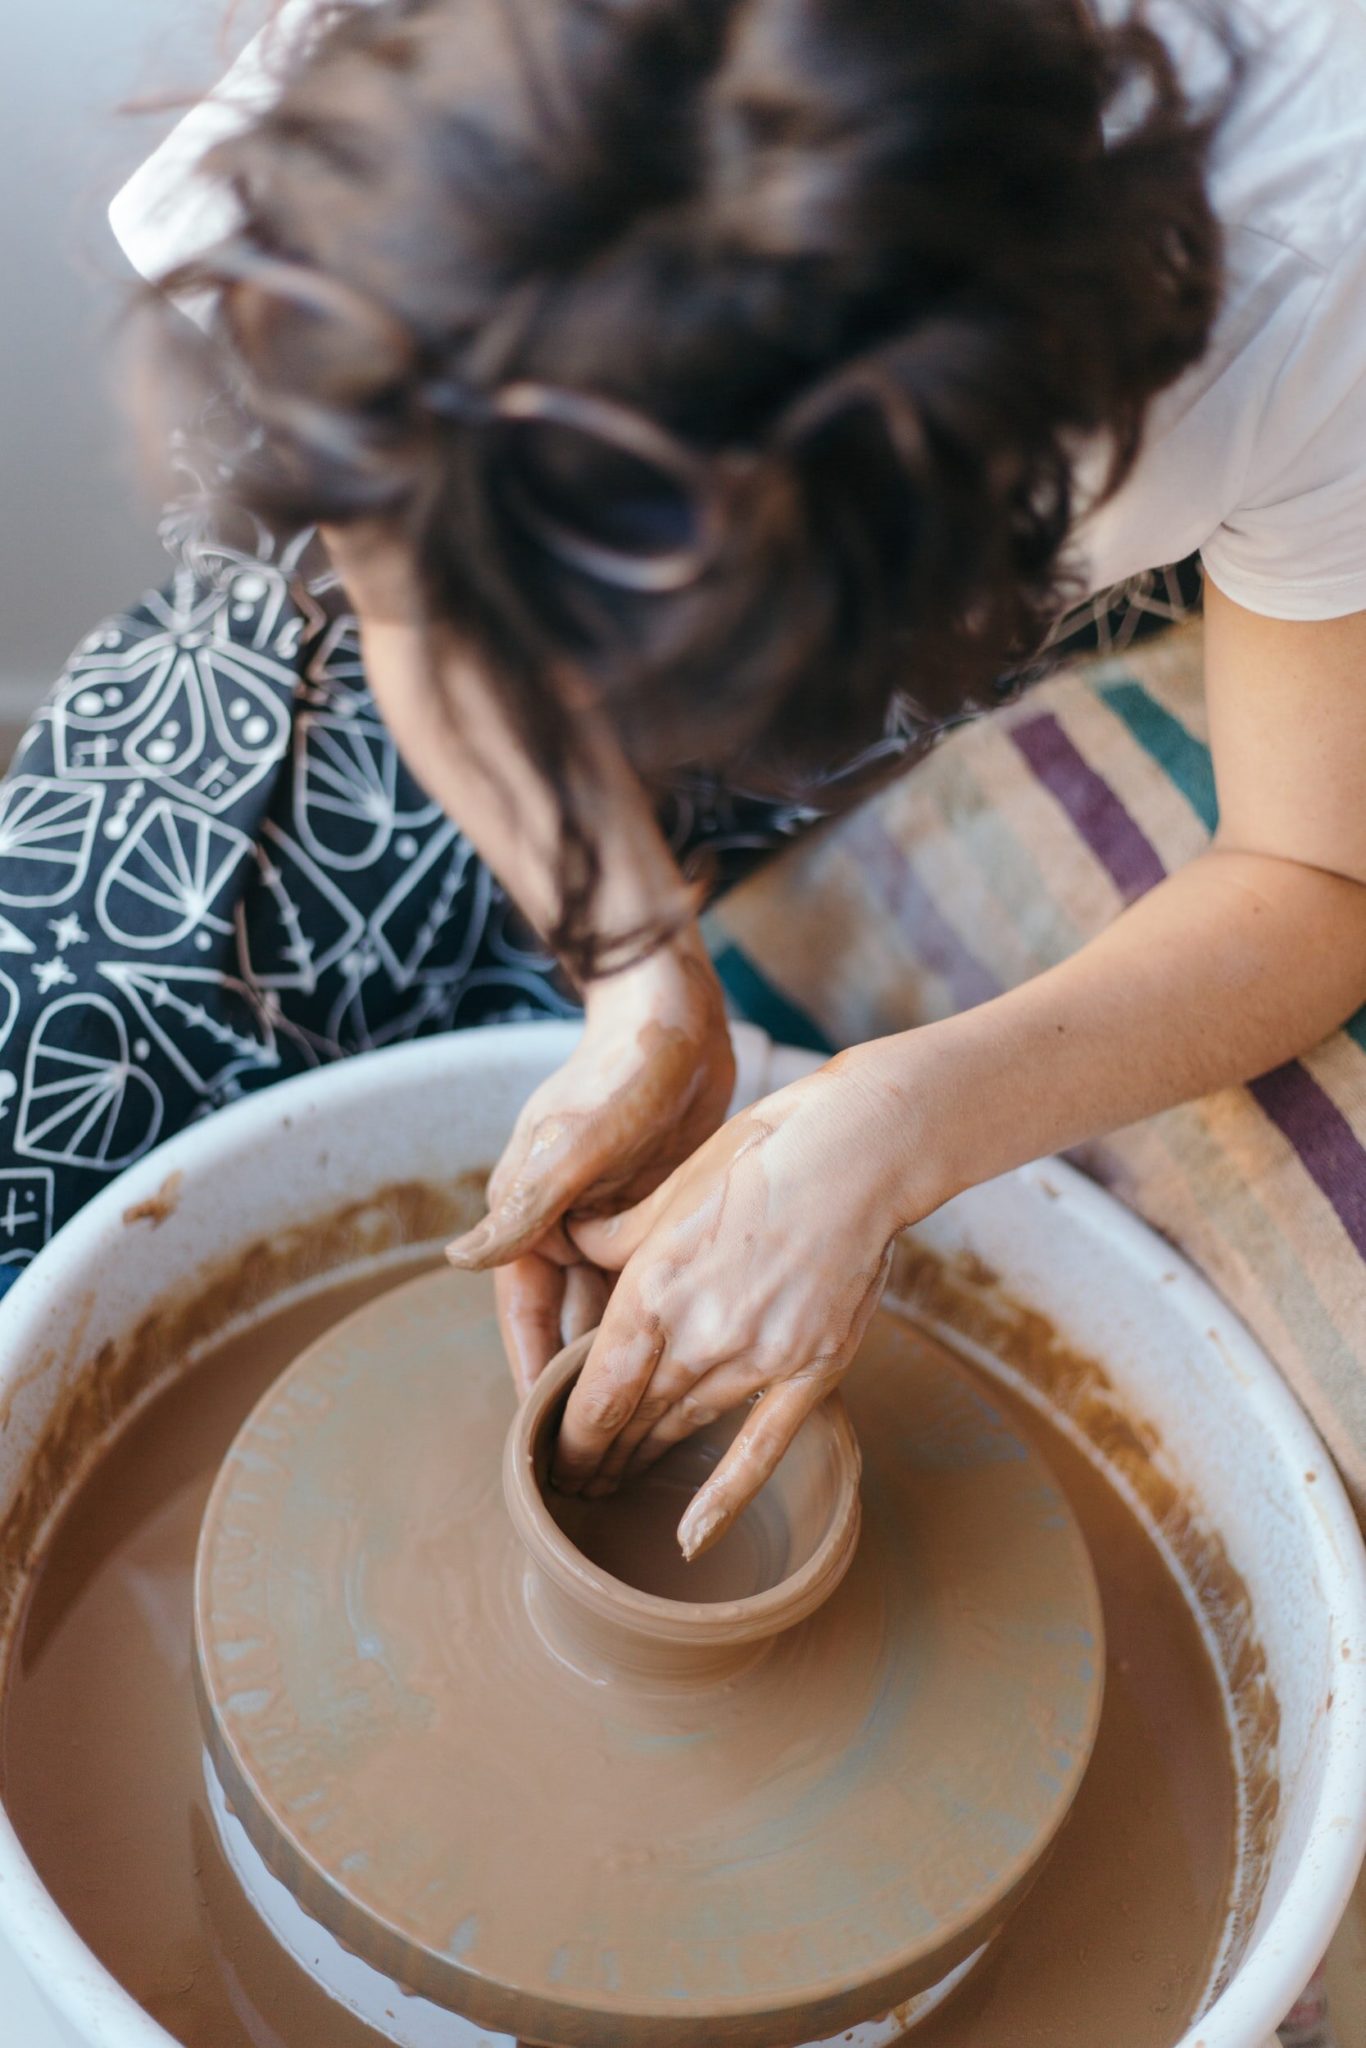 Female therapist practicing self-care strategies through artistic expression. As a therapist caring for your self is important. Working with an online therapist in Ohio and Kentucky can help you learn and implement your self-care strategies.